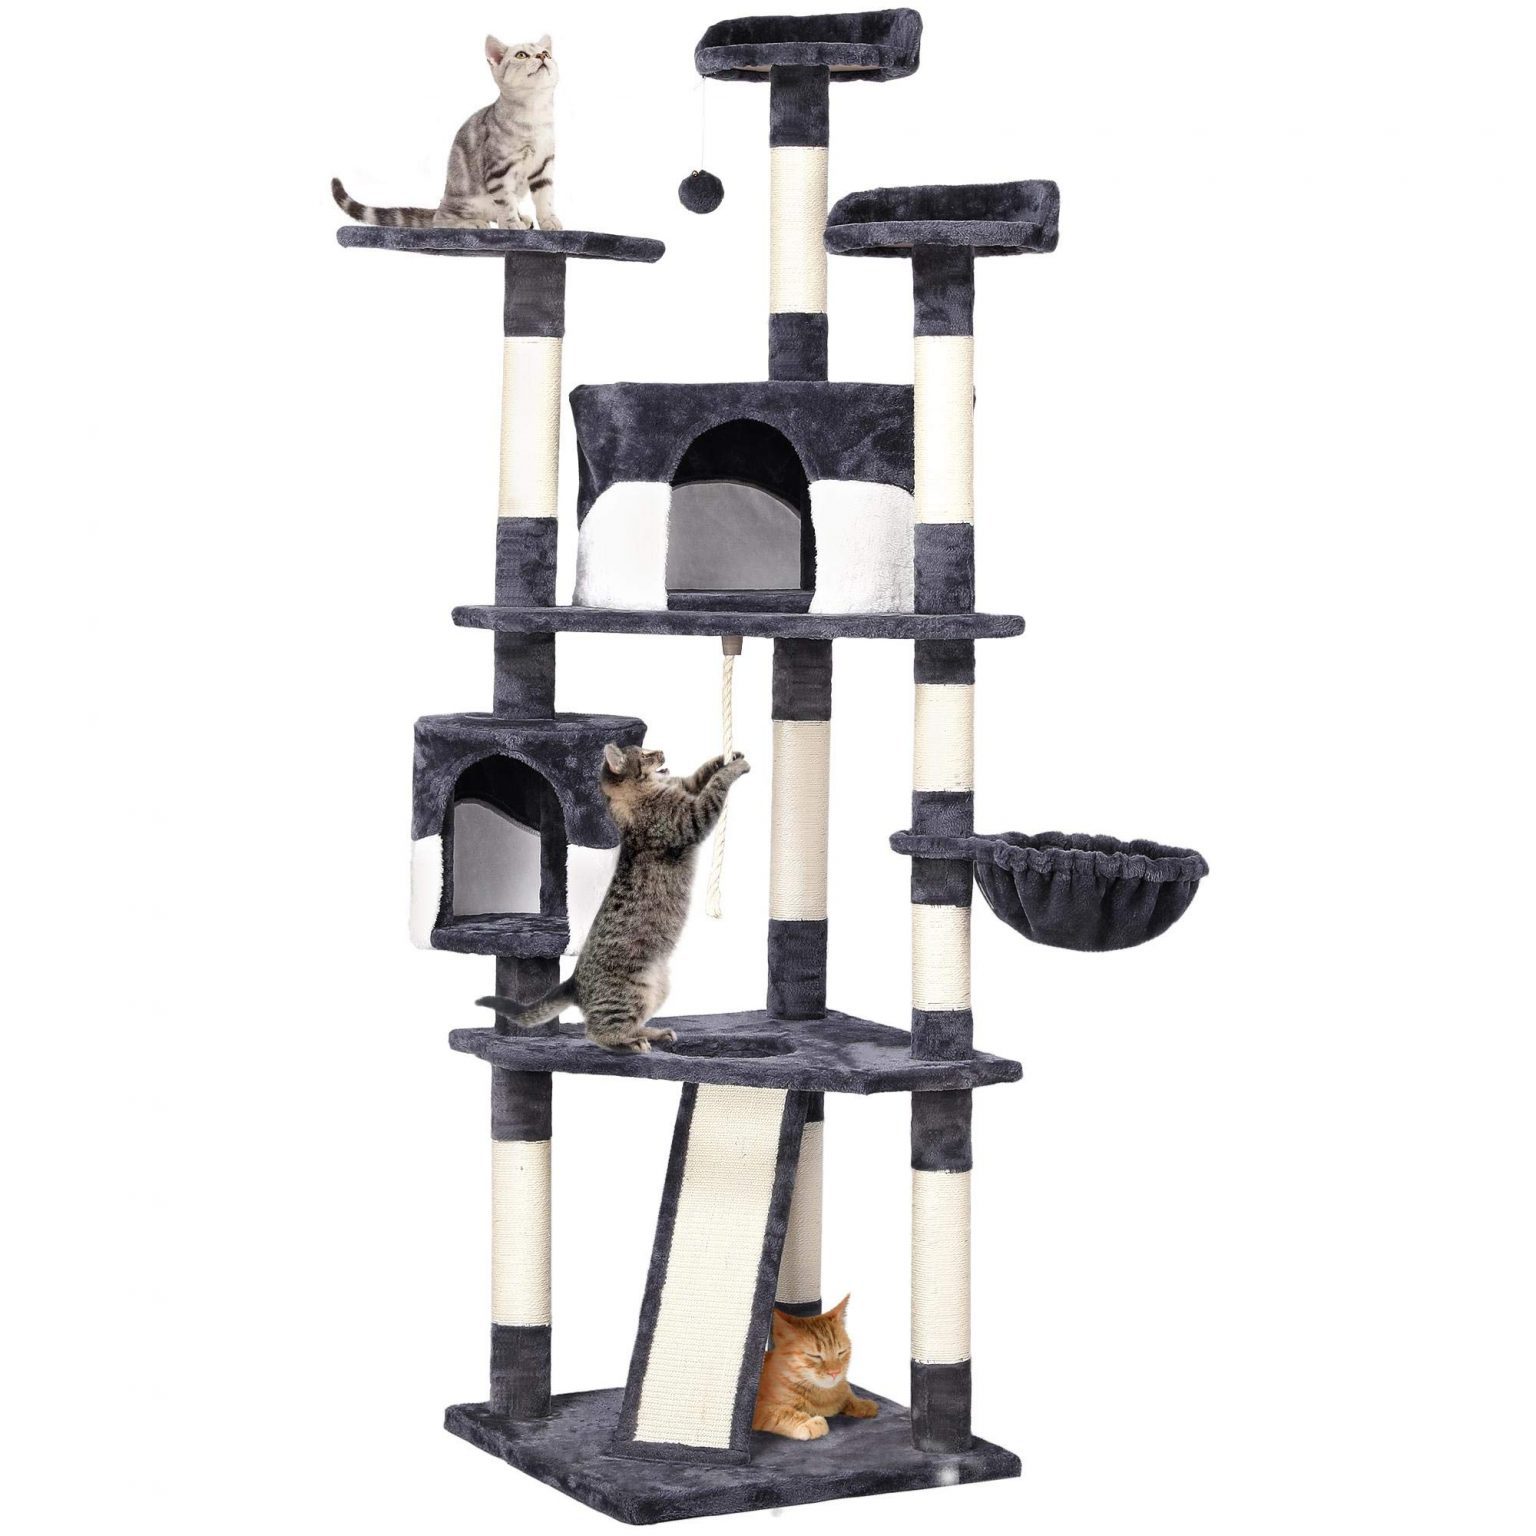 YAHEETECH 79in Multi-Level Cat Trees Review Price - CatPremier.com